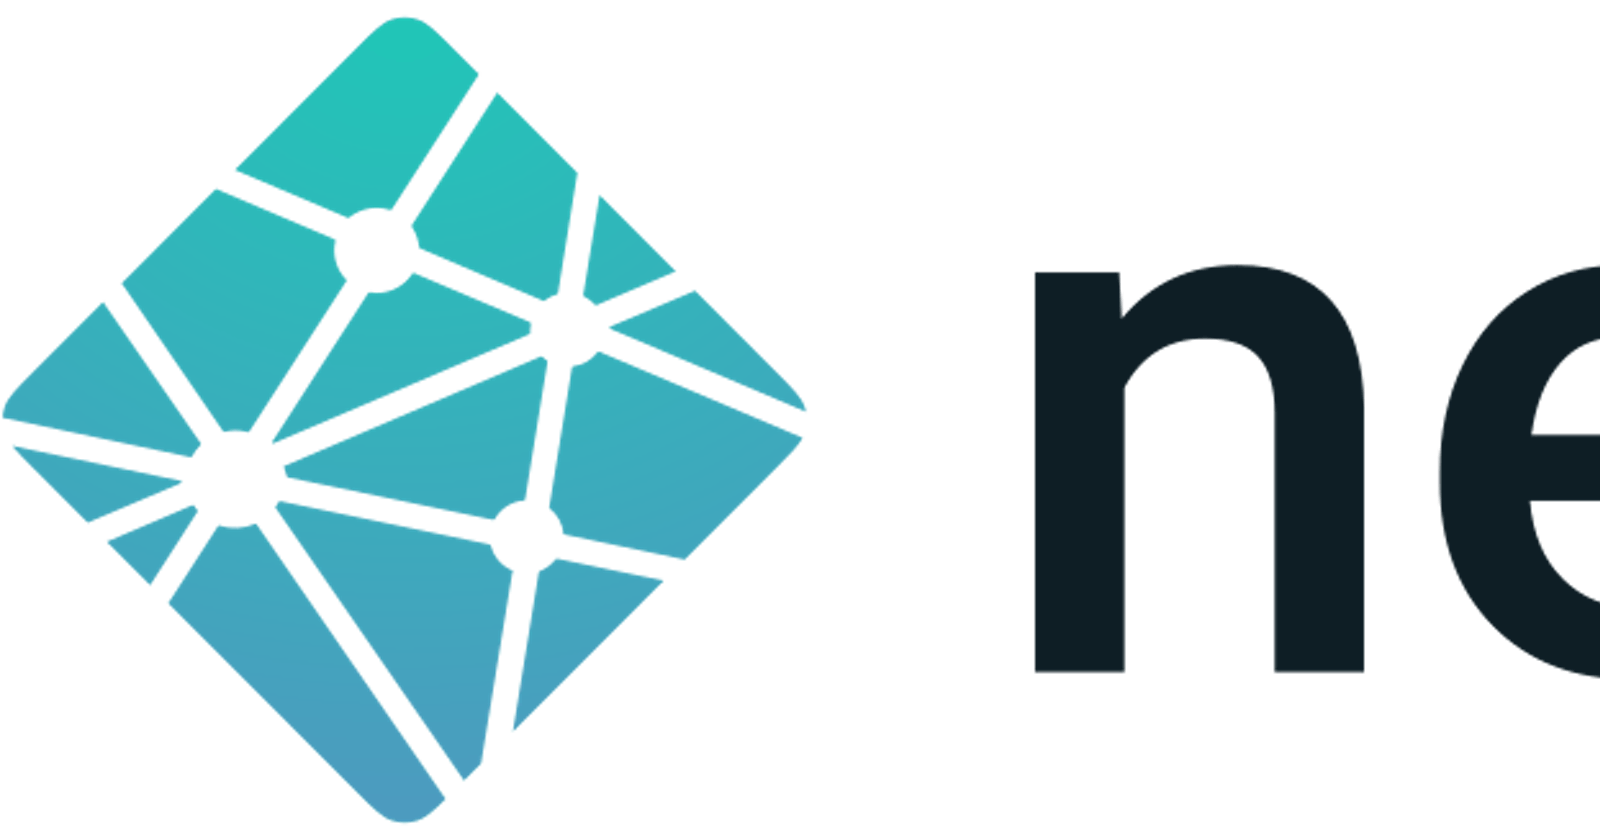 How to deploy sites on Netlify in easy steps